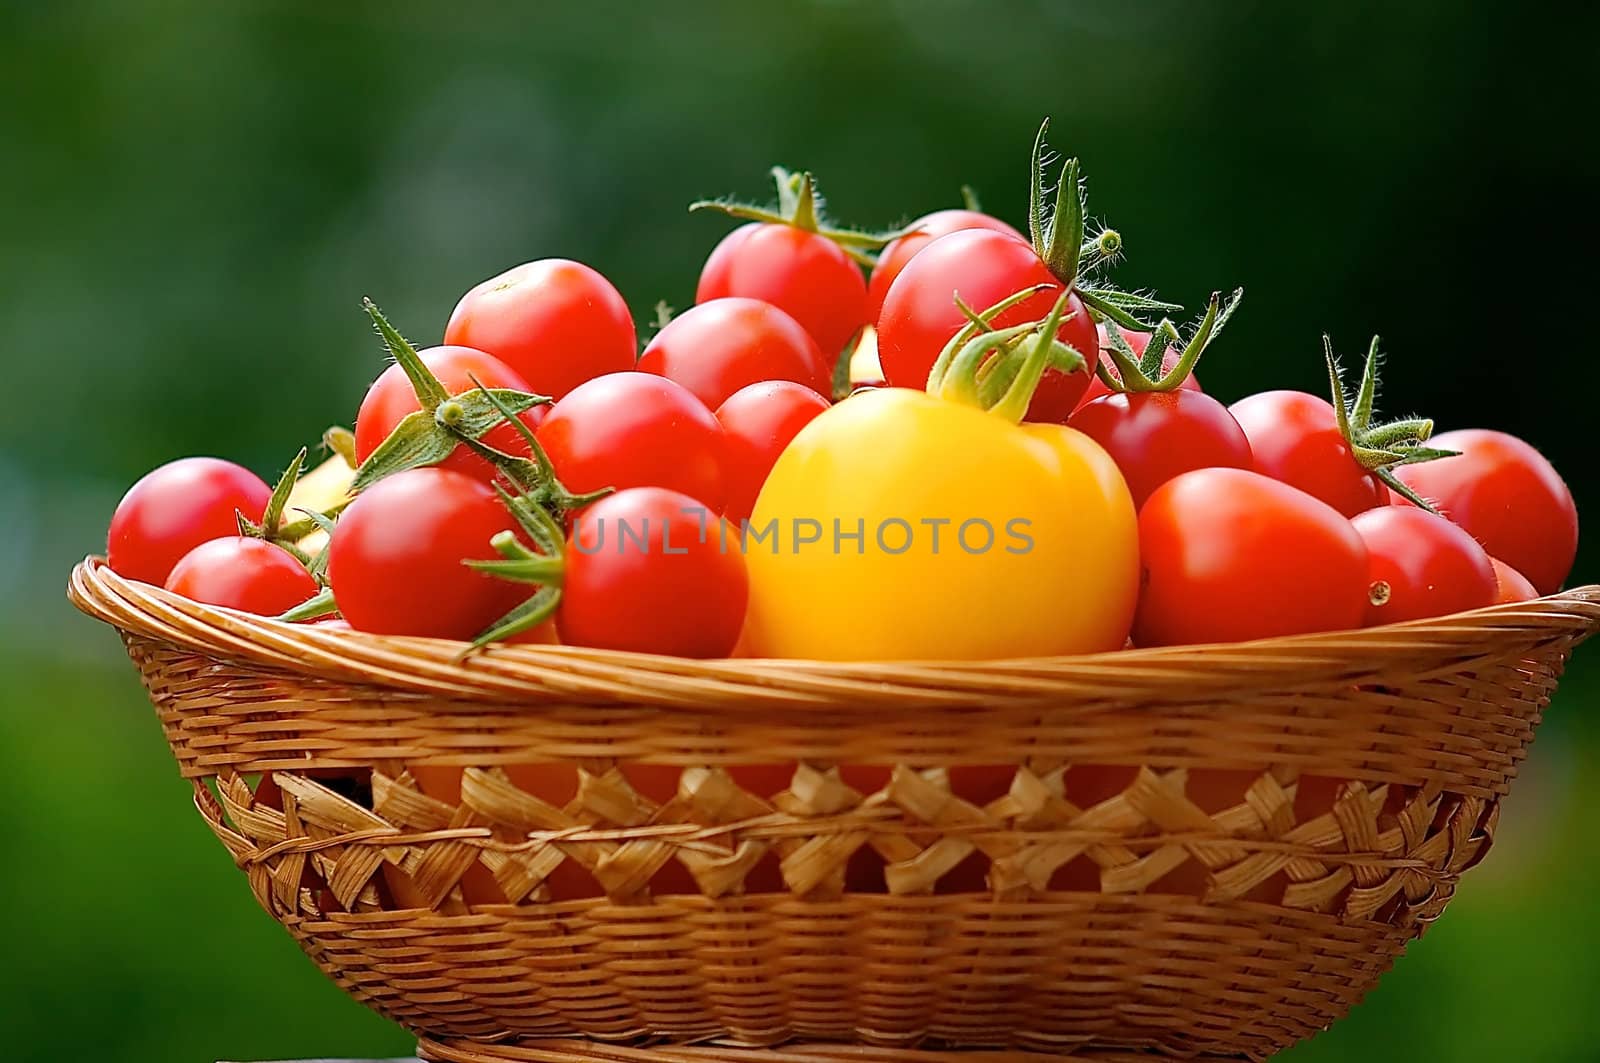 Colorful tomatoes by Talanis